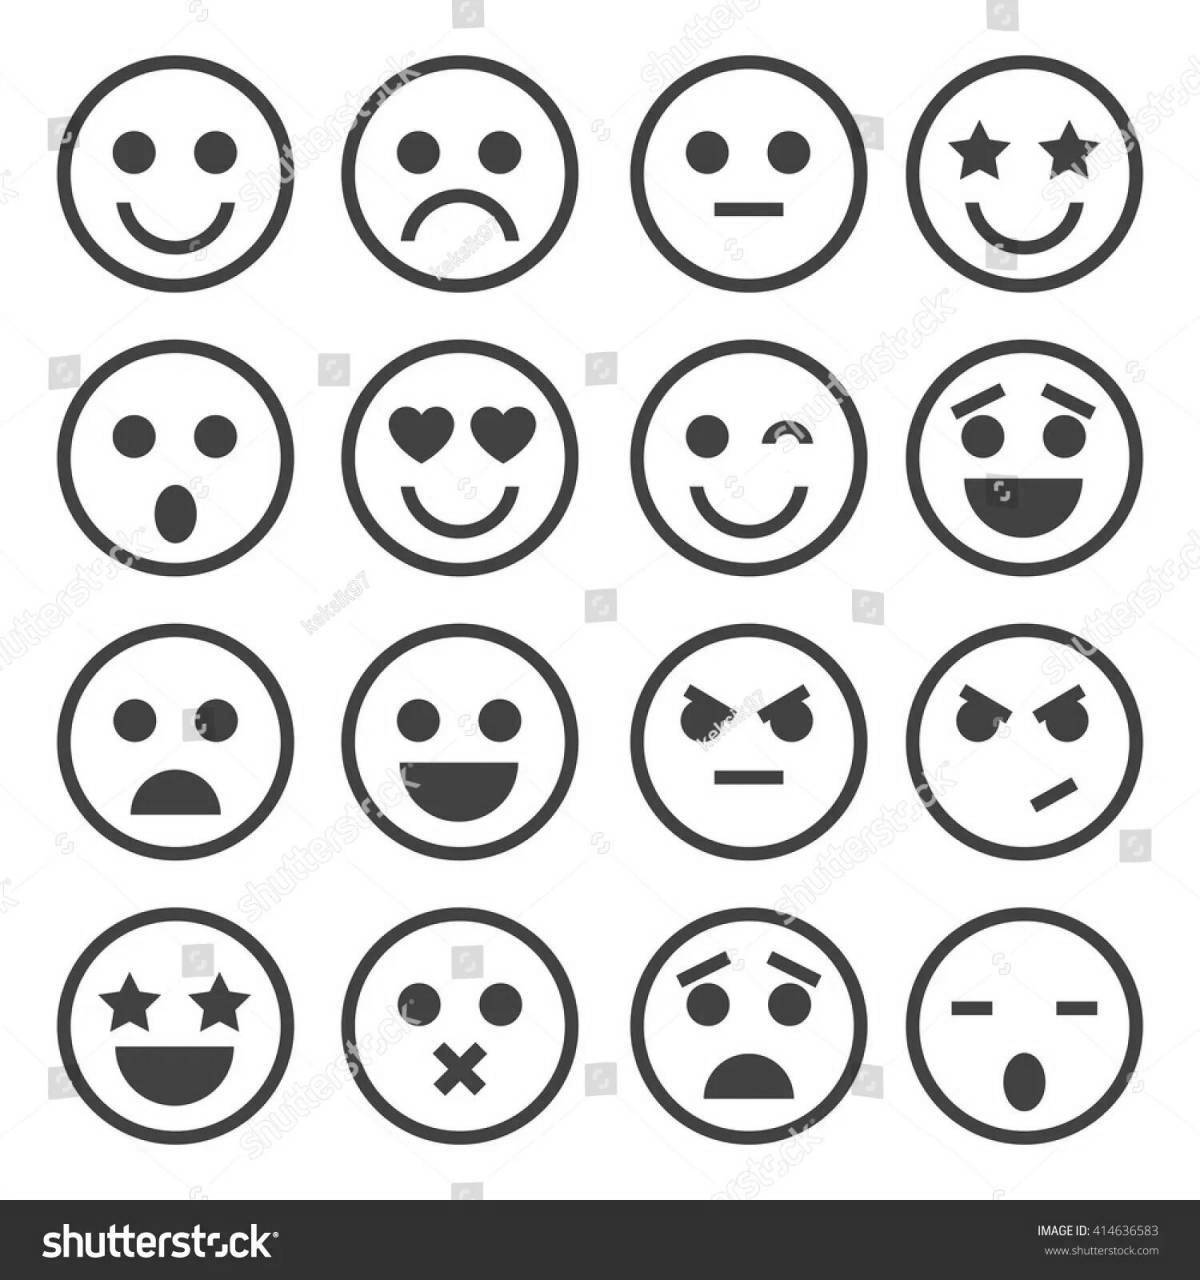 Attractive coloring pages small smileys for stickers